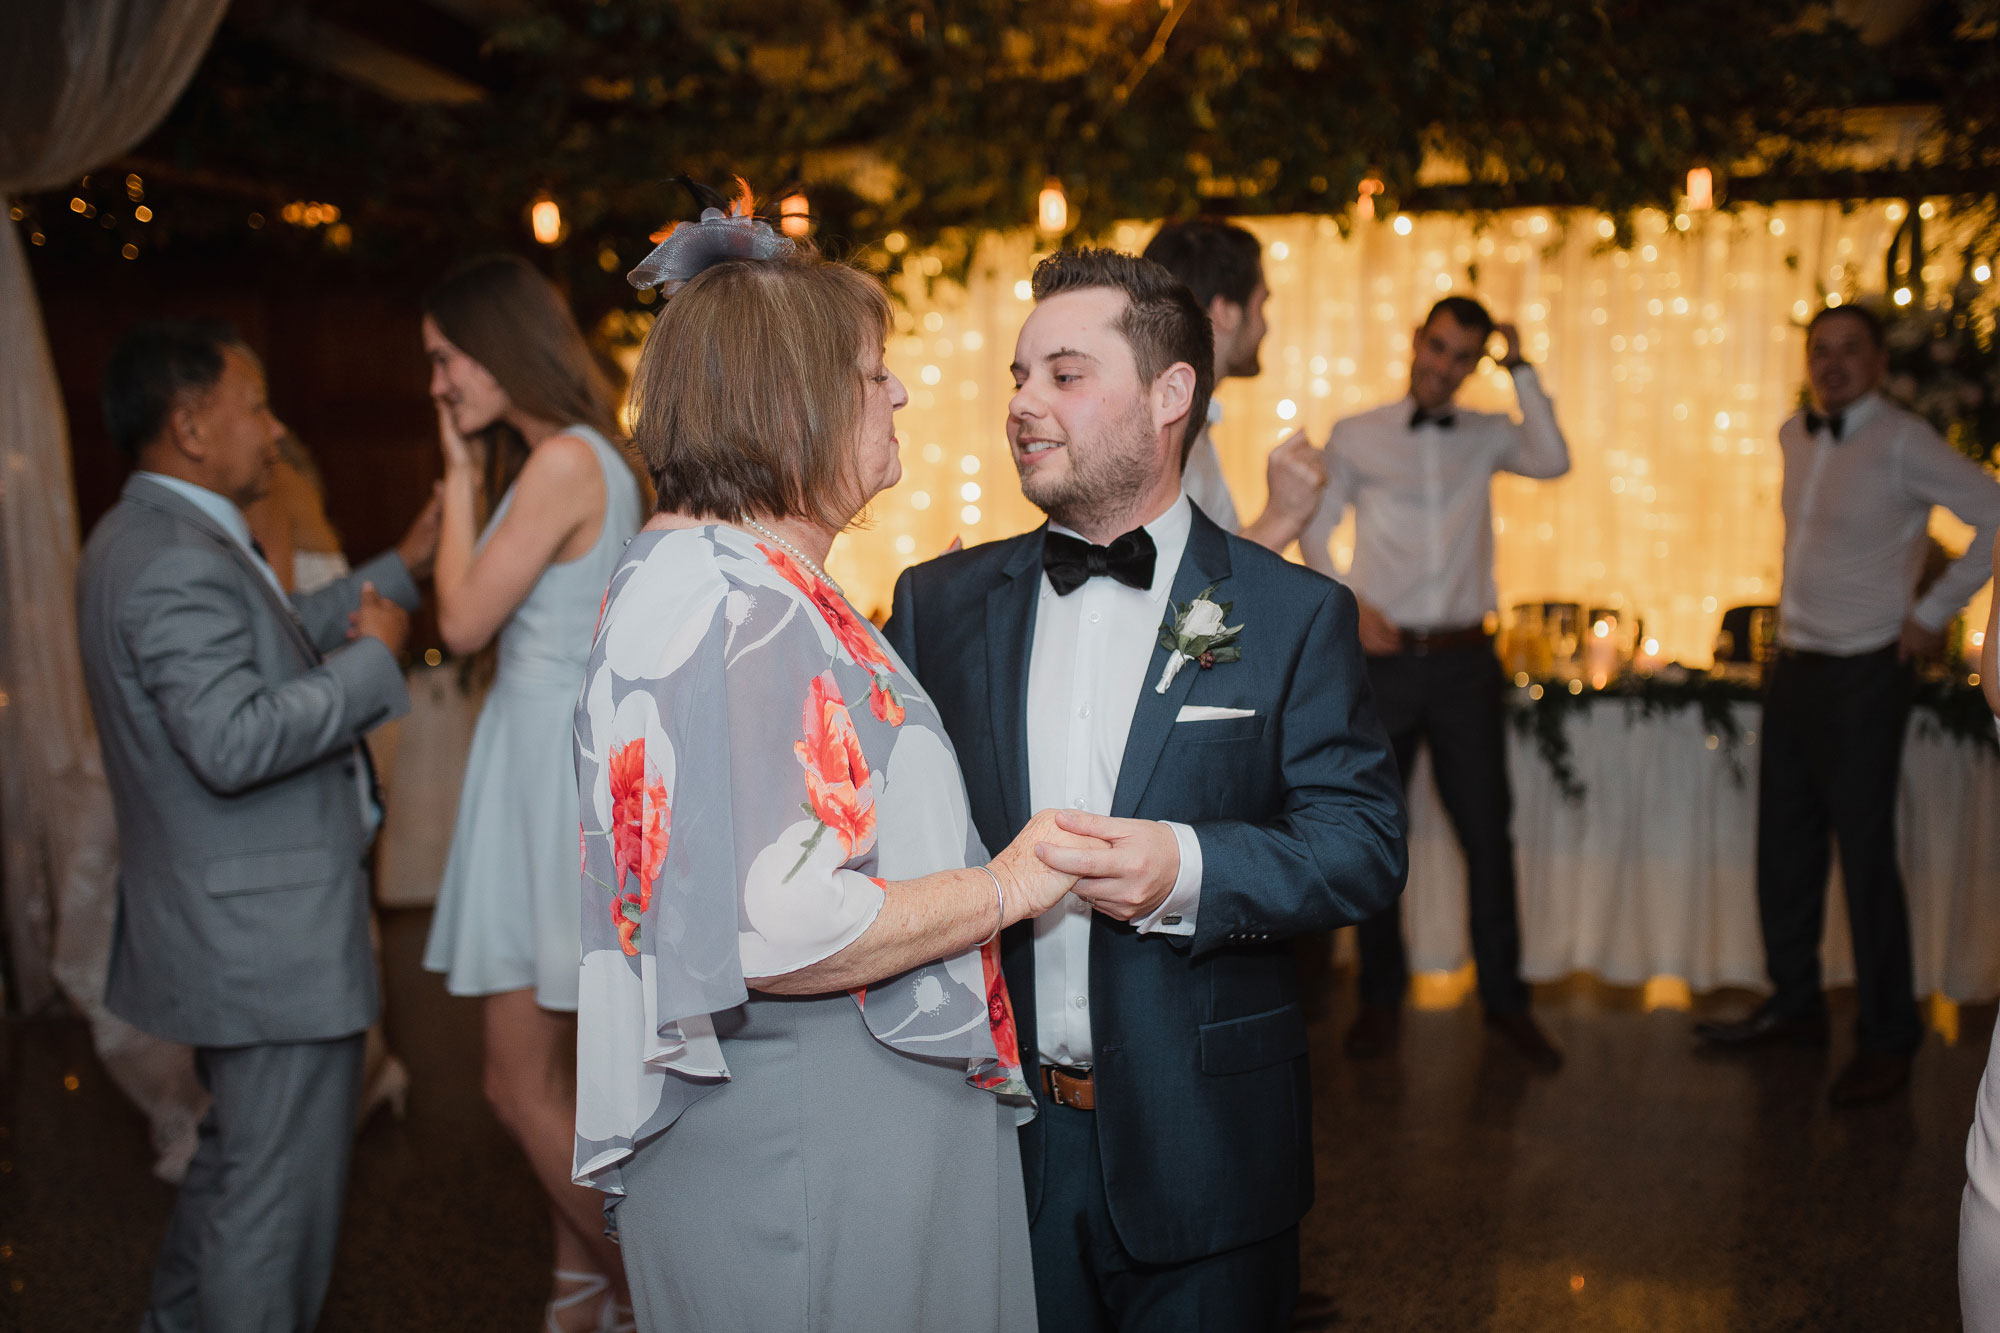 groom and mother dance at the wedding